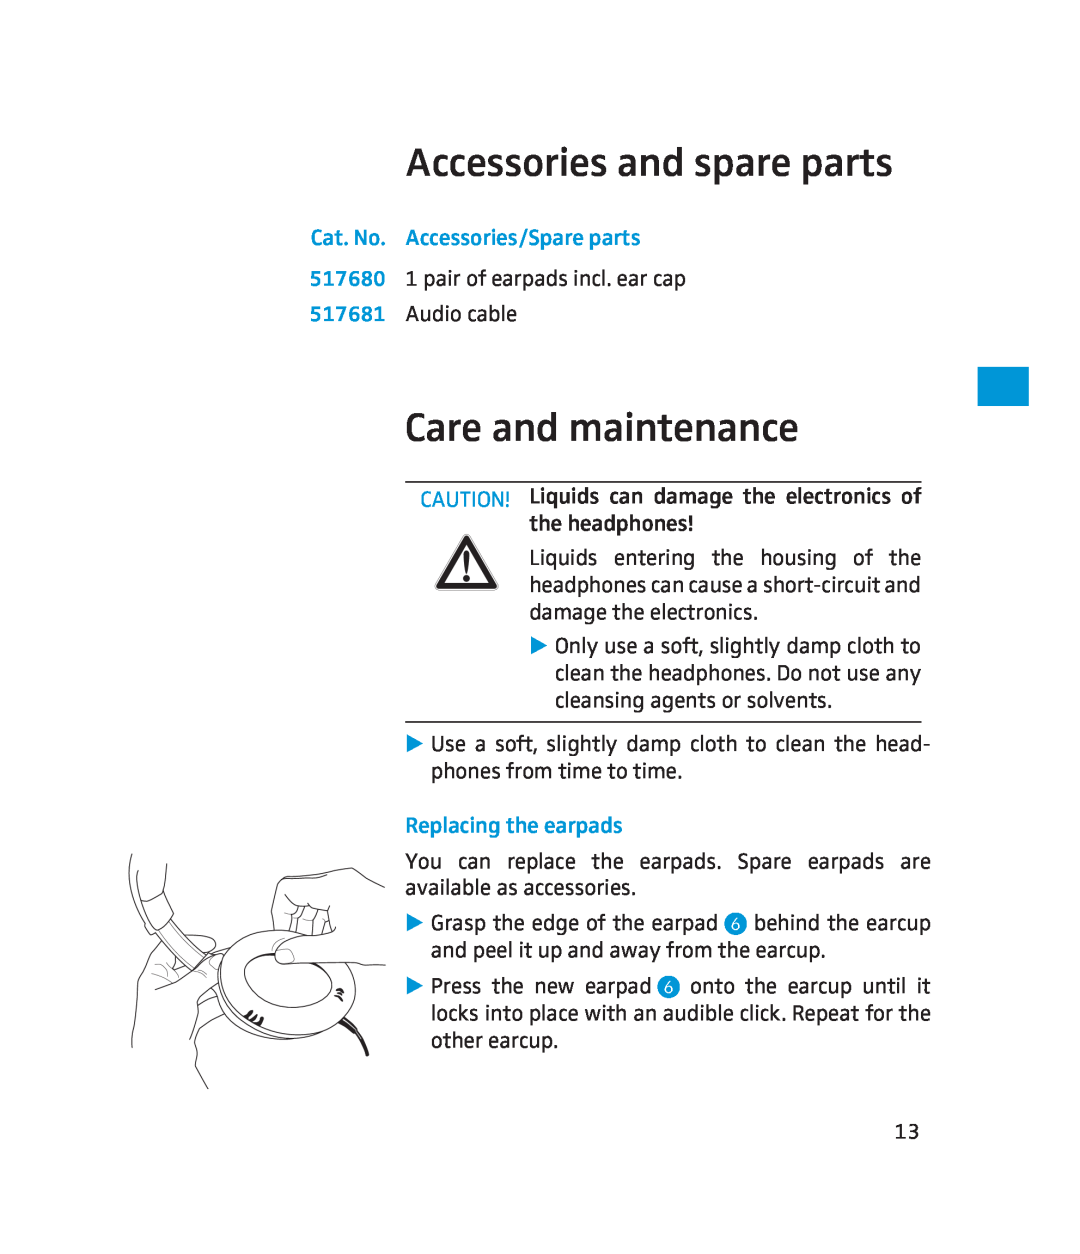 Sennheiser 500371 instruction manual Accessories and spare parts, Care and maintenance, Cat. No. Accessories/Spare parts 